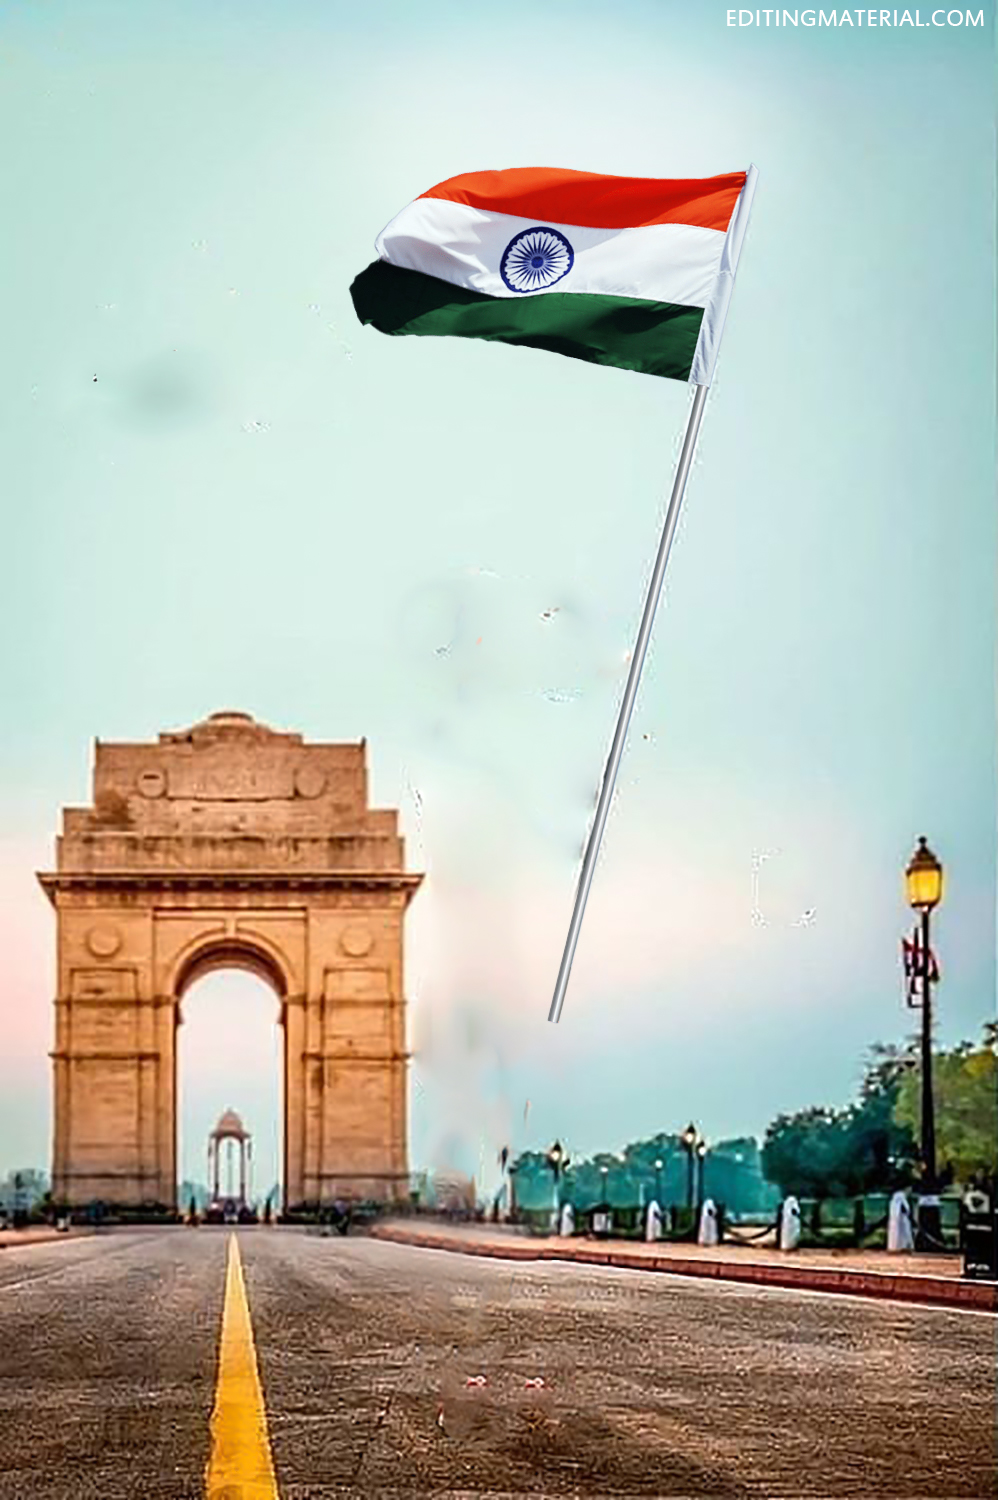 26 January 2019 photo editing backgrounds for Picsart and photoshop, Picsart  photo editing background republic day Editing|